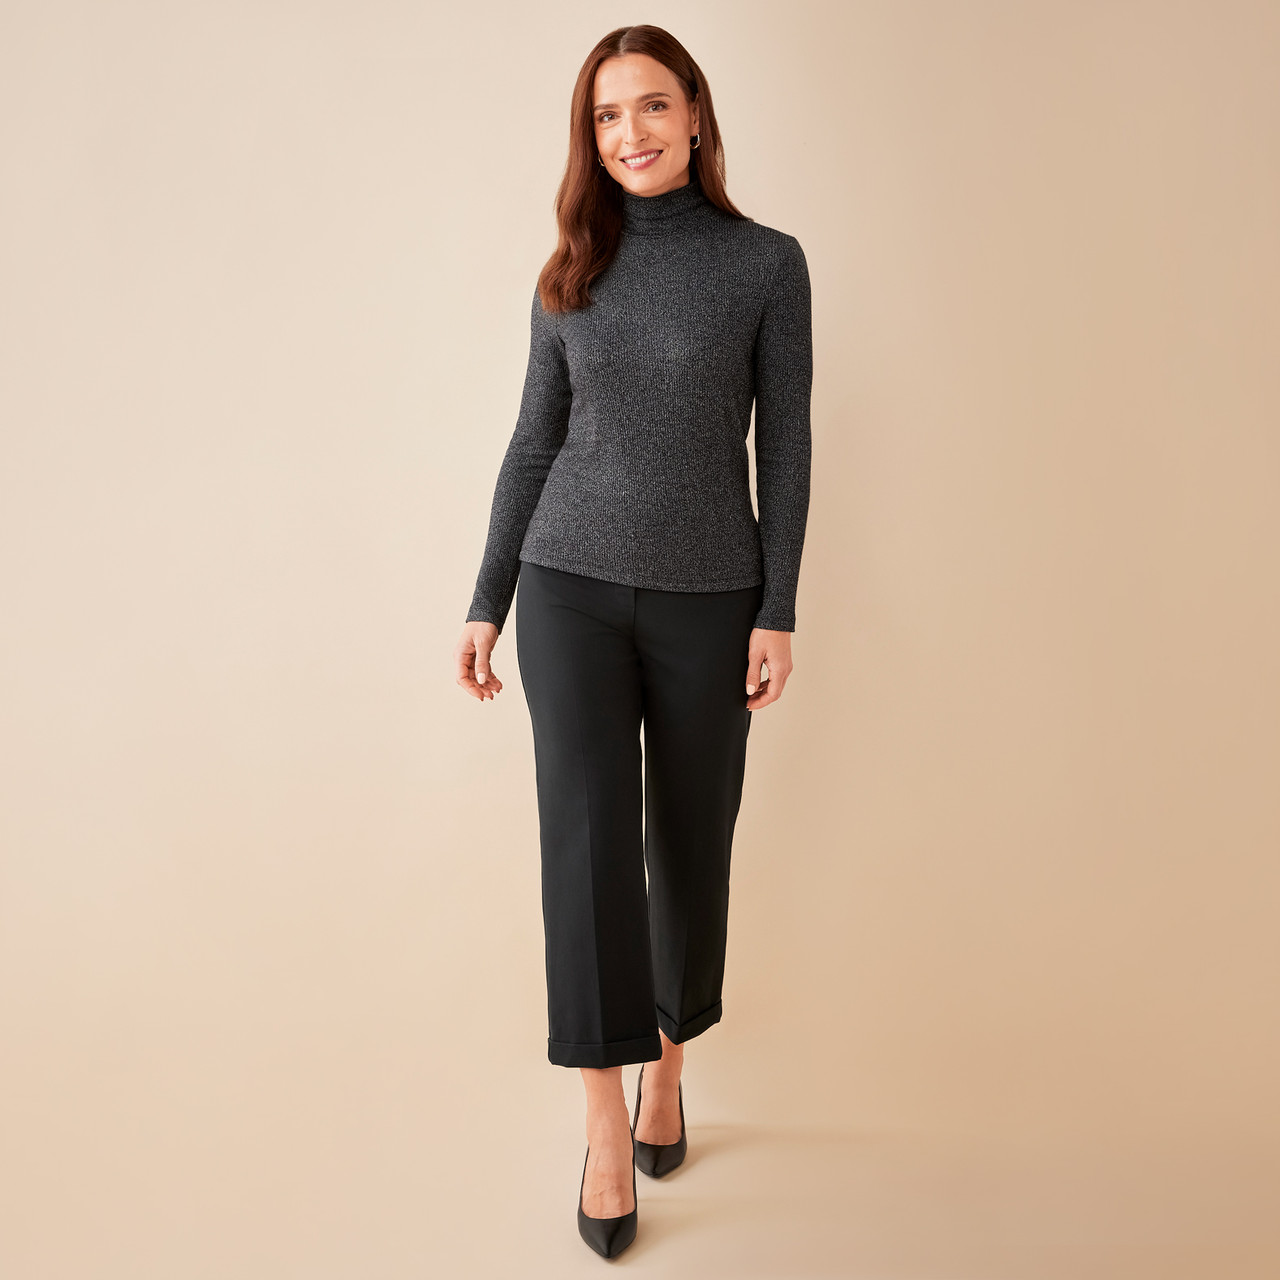 Women's Rib Knit Turtleneck Top | Northern Reflections